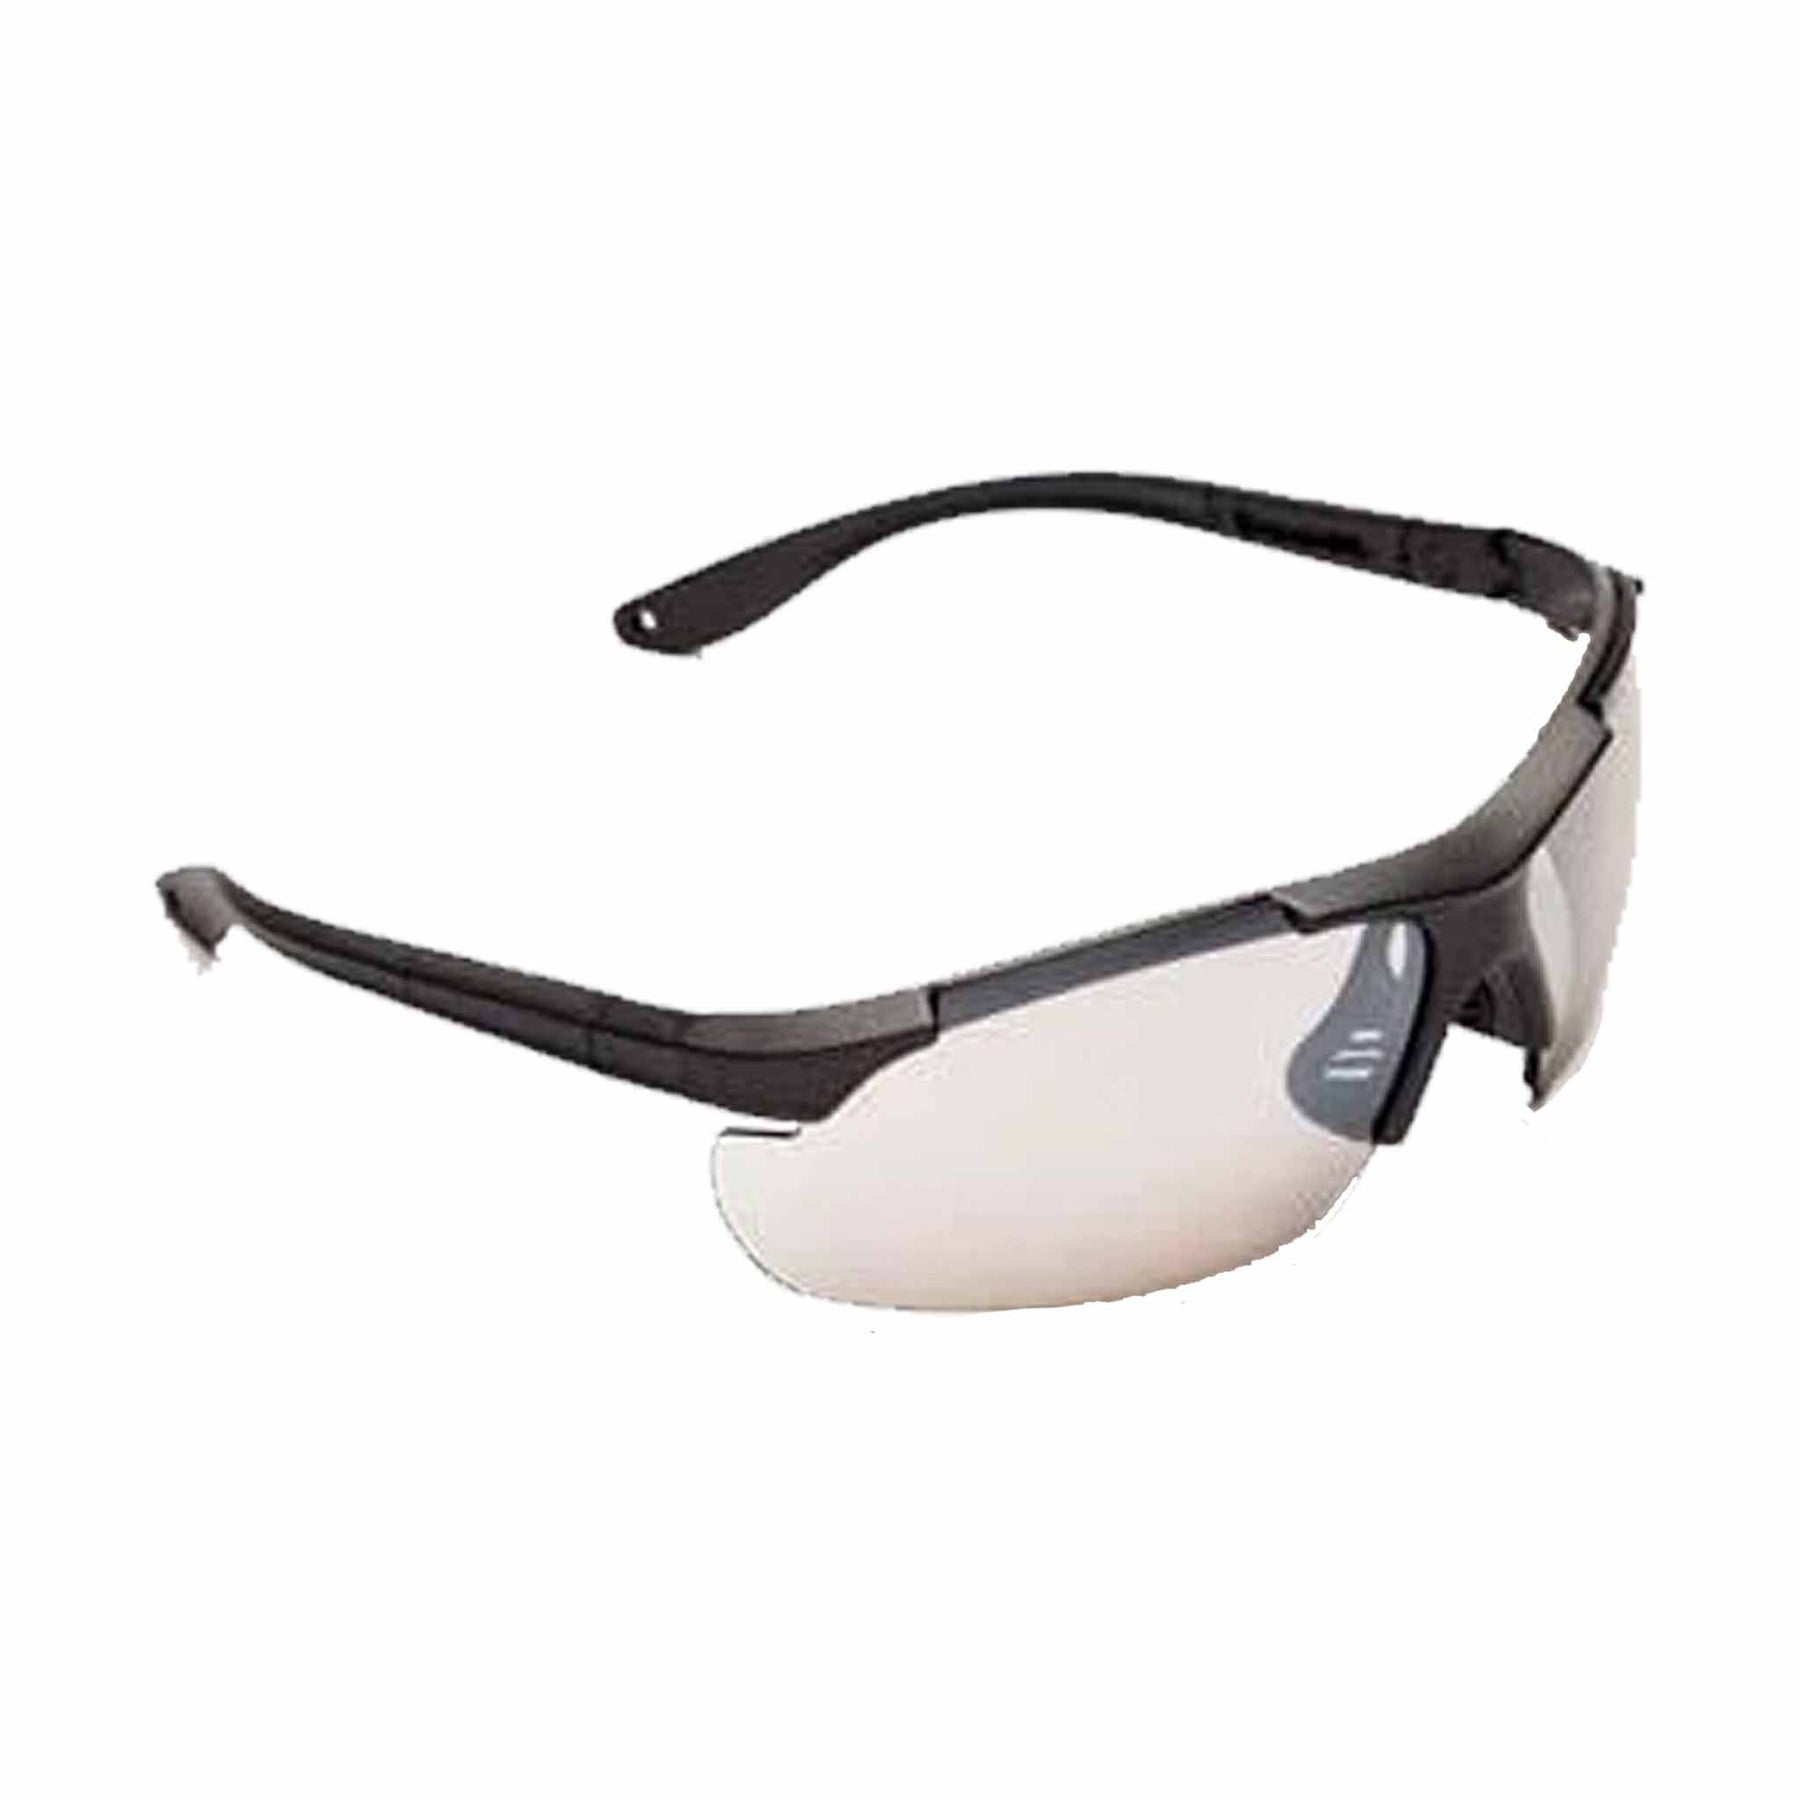 typhoon safety glasses with indoor and outdoor lens